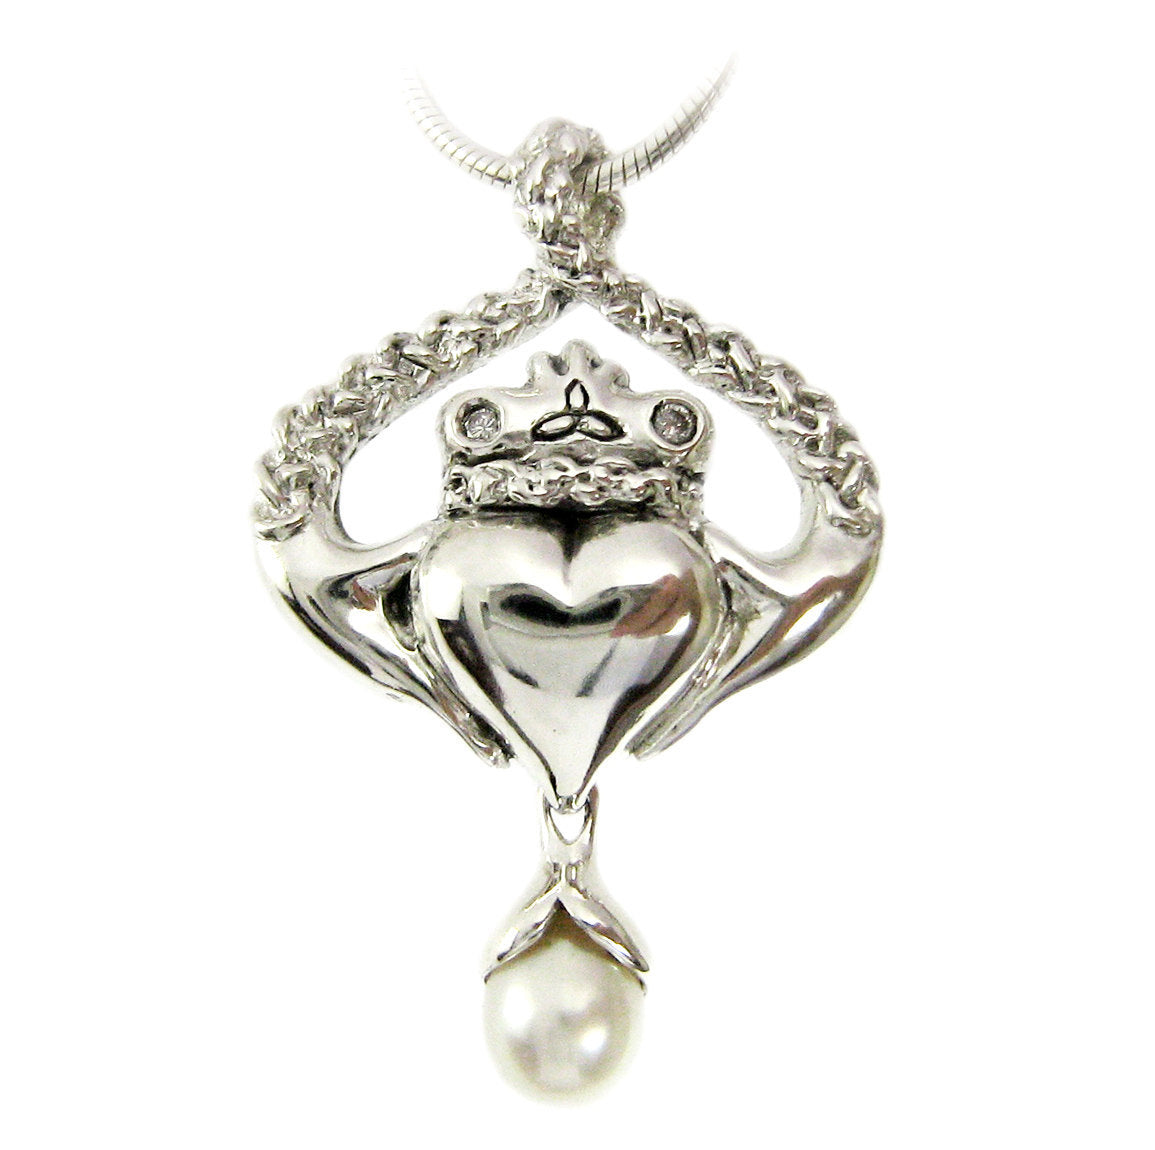 Pearl and Diamond Claddagh Pendant - Triquetra Trinity Celtic Love knot Circle Necklace Irish Jewelry Wedding Anniversary Meaningful Gift 13